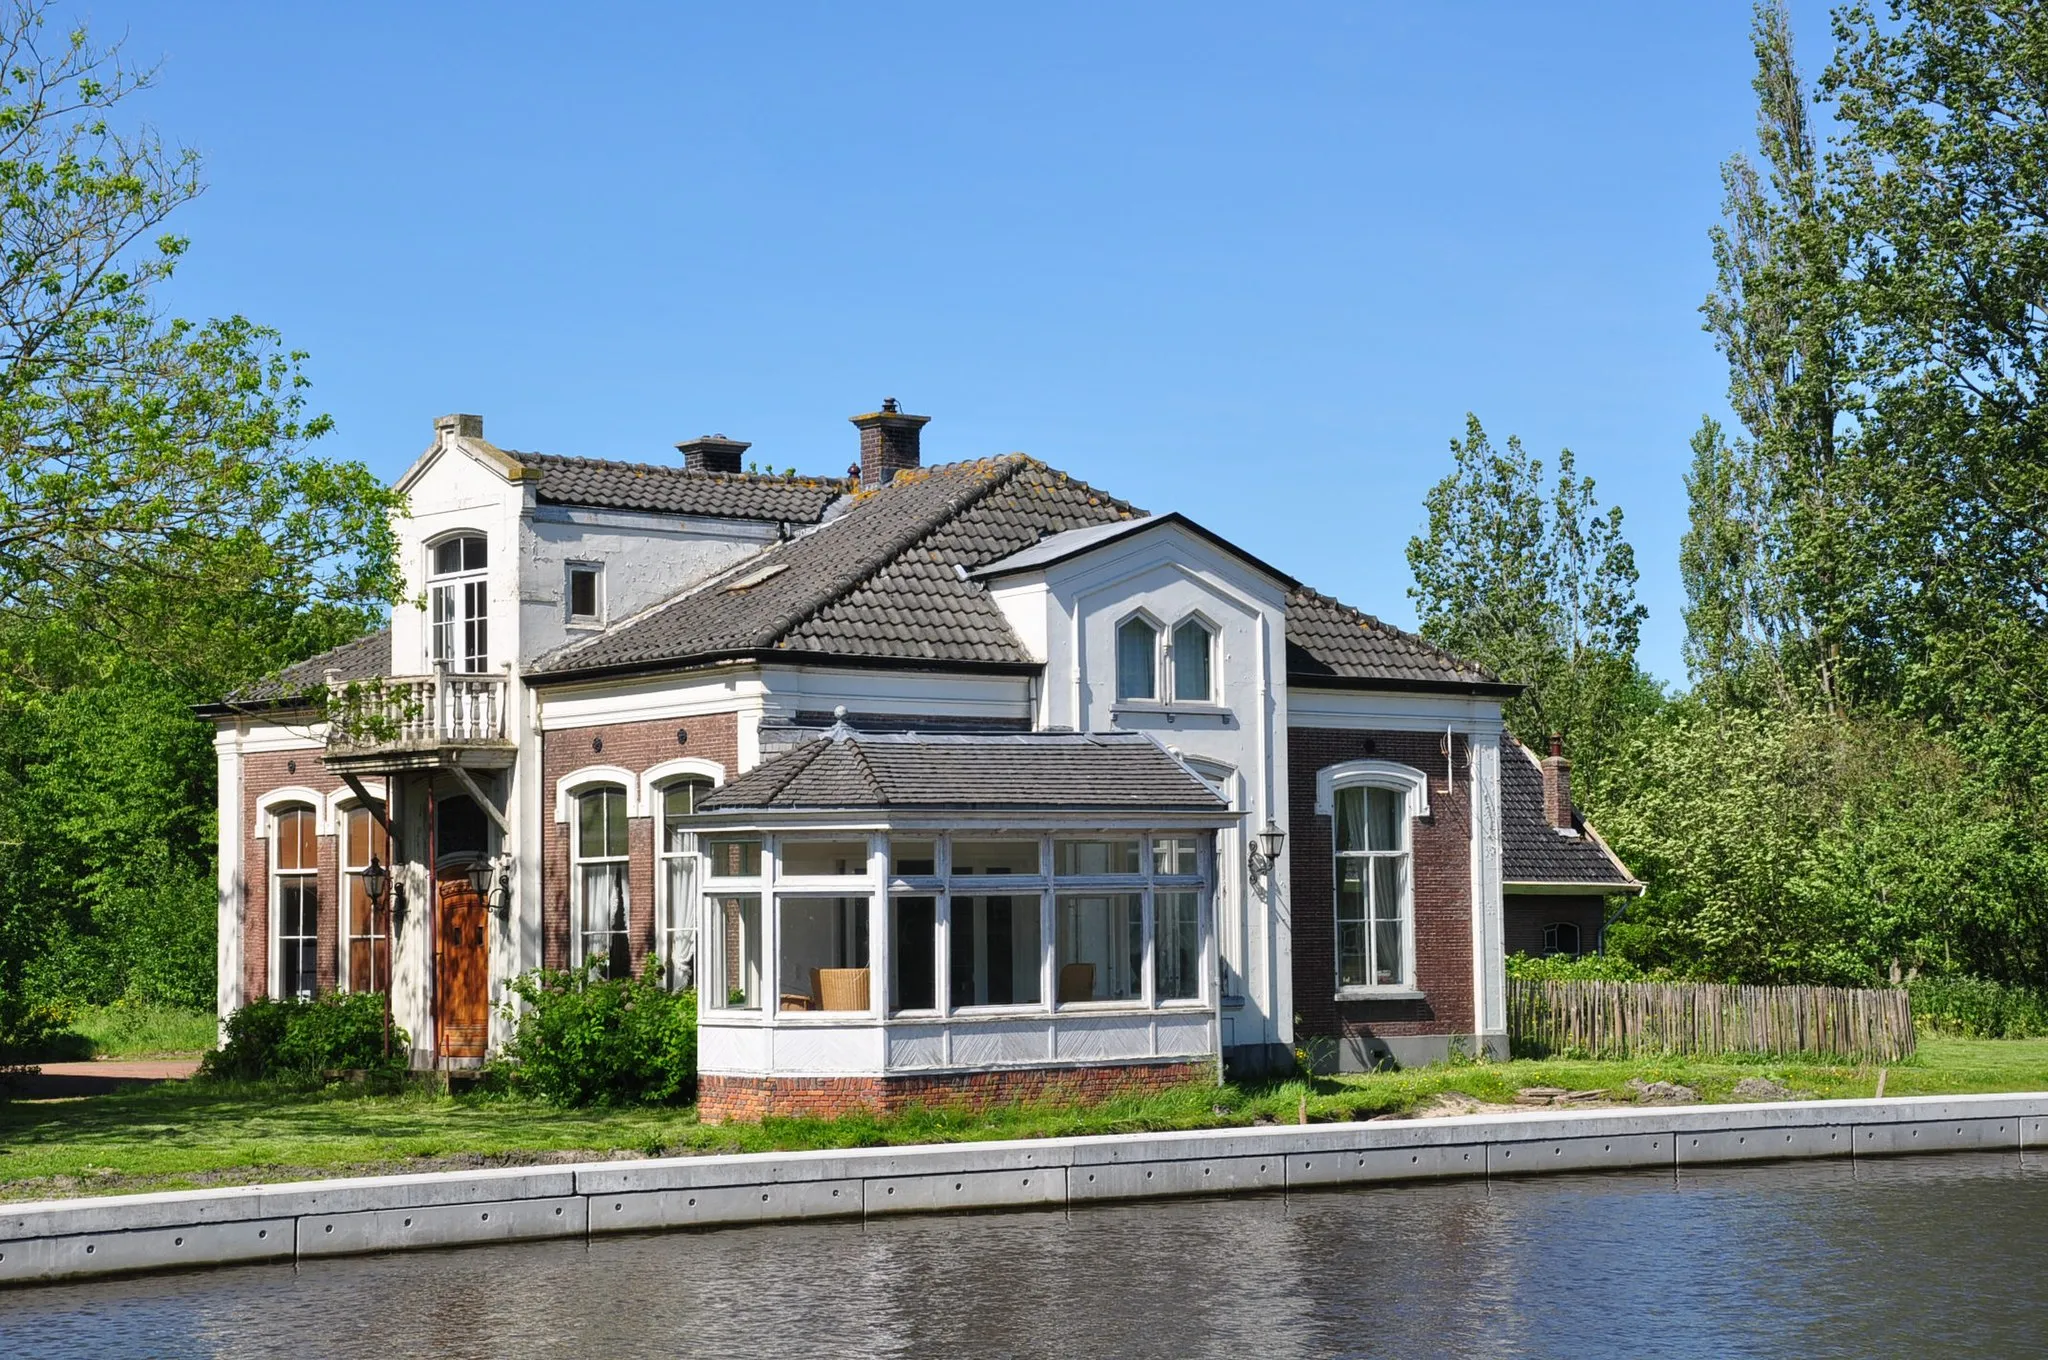 Photo showing: Home of the managing director of the former pottery factory "Nieuw Werklust" along the Old Rhine at Groenendijk (a hamlet between Zoeterwoude-Rijndijk and Hazerswoude-Rijndijk, municipality Rijnwoude, Province South Holland, Netherlands). The house was built in the late 19th century and is a listed building.